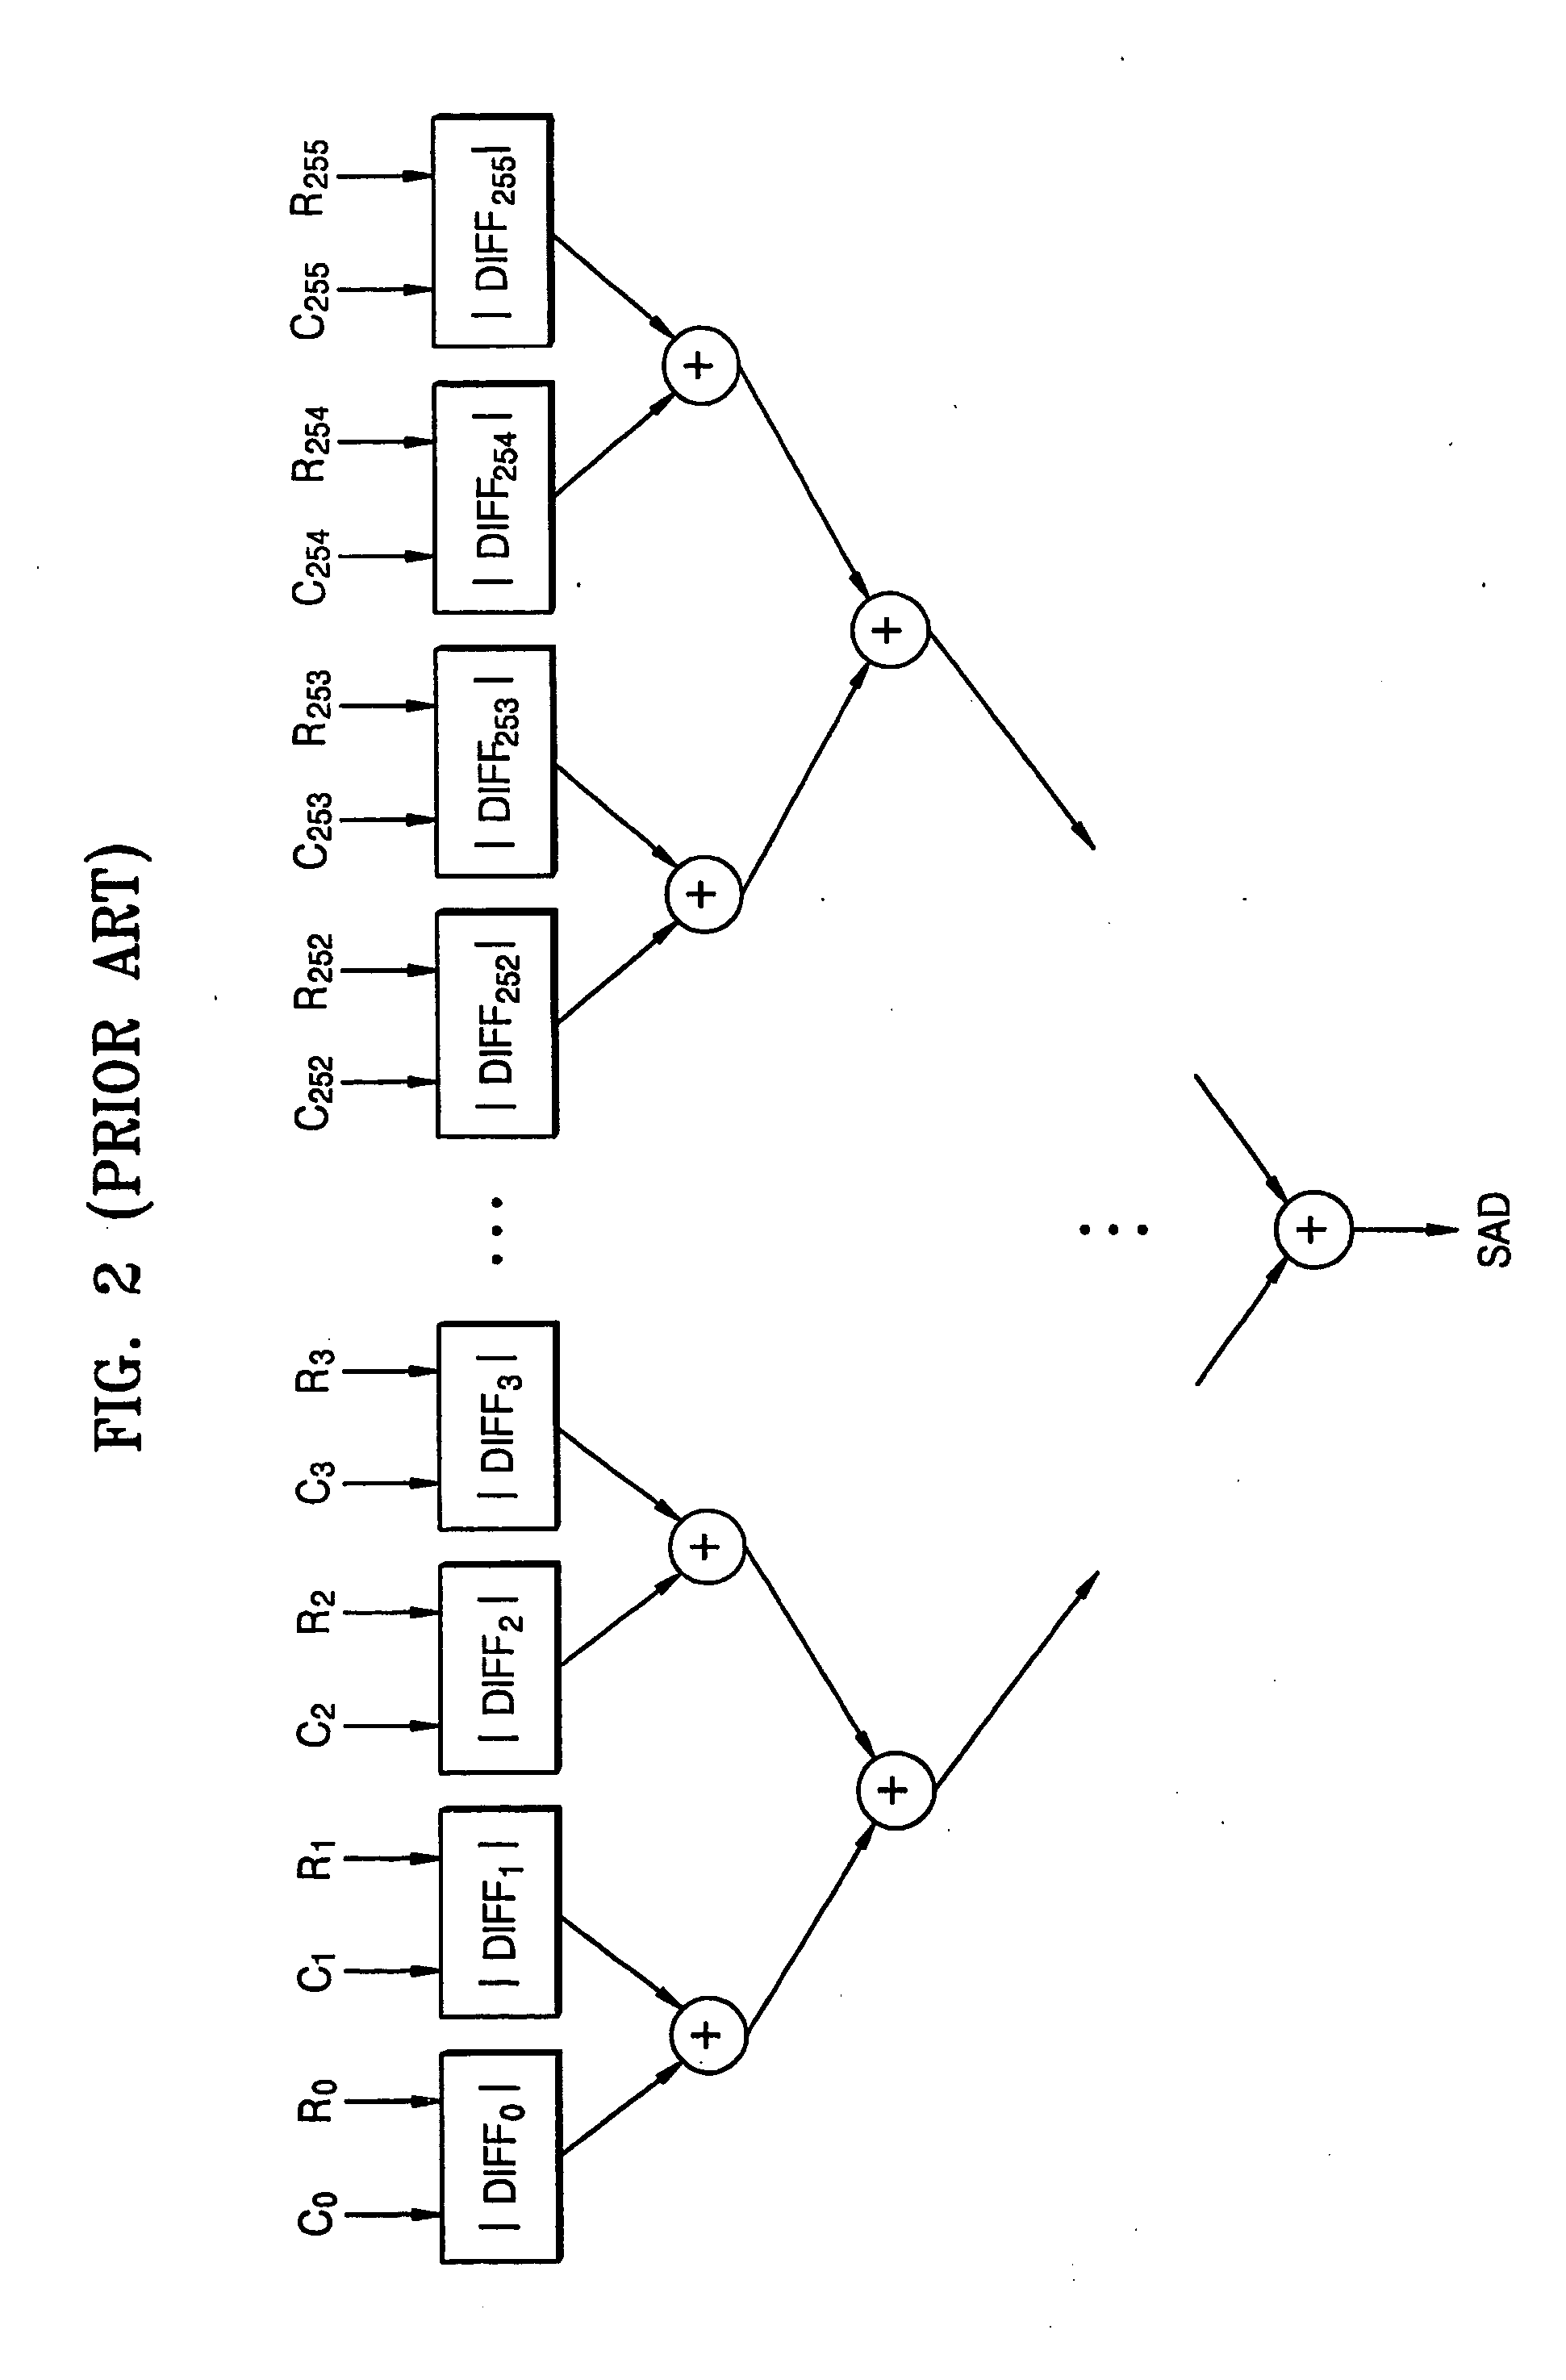 Apparatus for calculating absolute difference value, and motion estimation apparatus and motion picture encoding apparatus which use the apparatus for calculating the absolute difference value